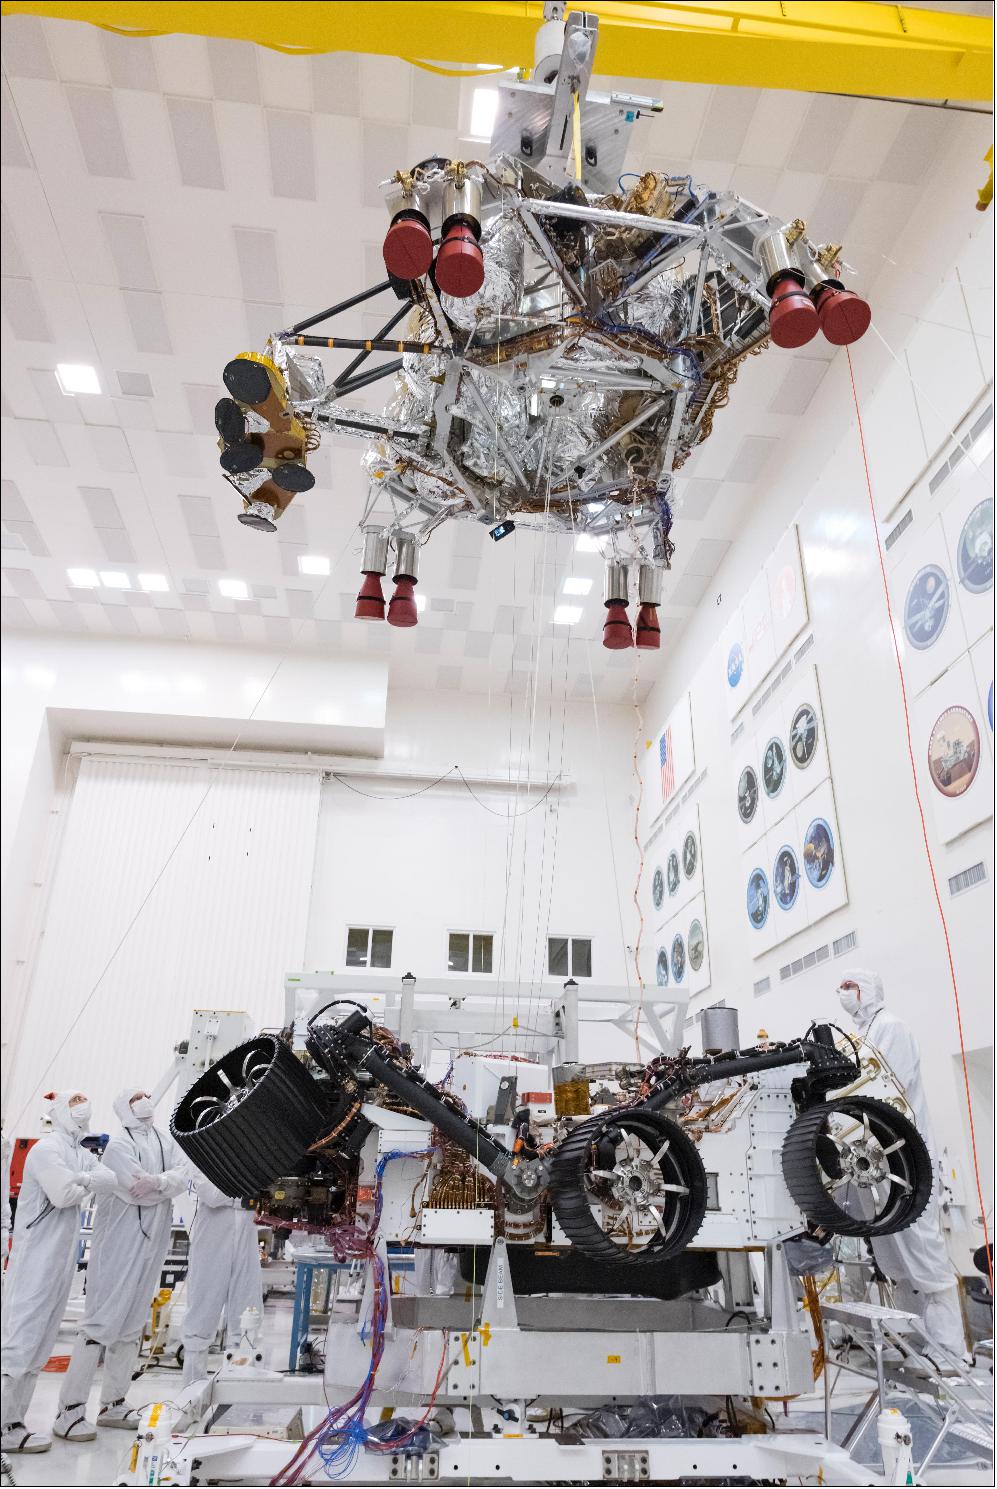 Figure 11: In this picture from Sept. 28, 2019, engineers and technicians working on the Mars 2020 spacecraft at NASA's Jet Propulsion Laboratory in Pasadena, California, look on as a crane lifts the rocket-powered descent stage away from the rover after a test (image credit: NASA/JPL-Caltech)